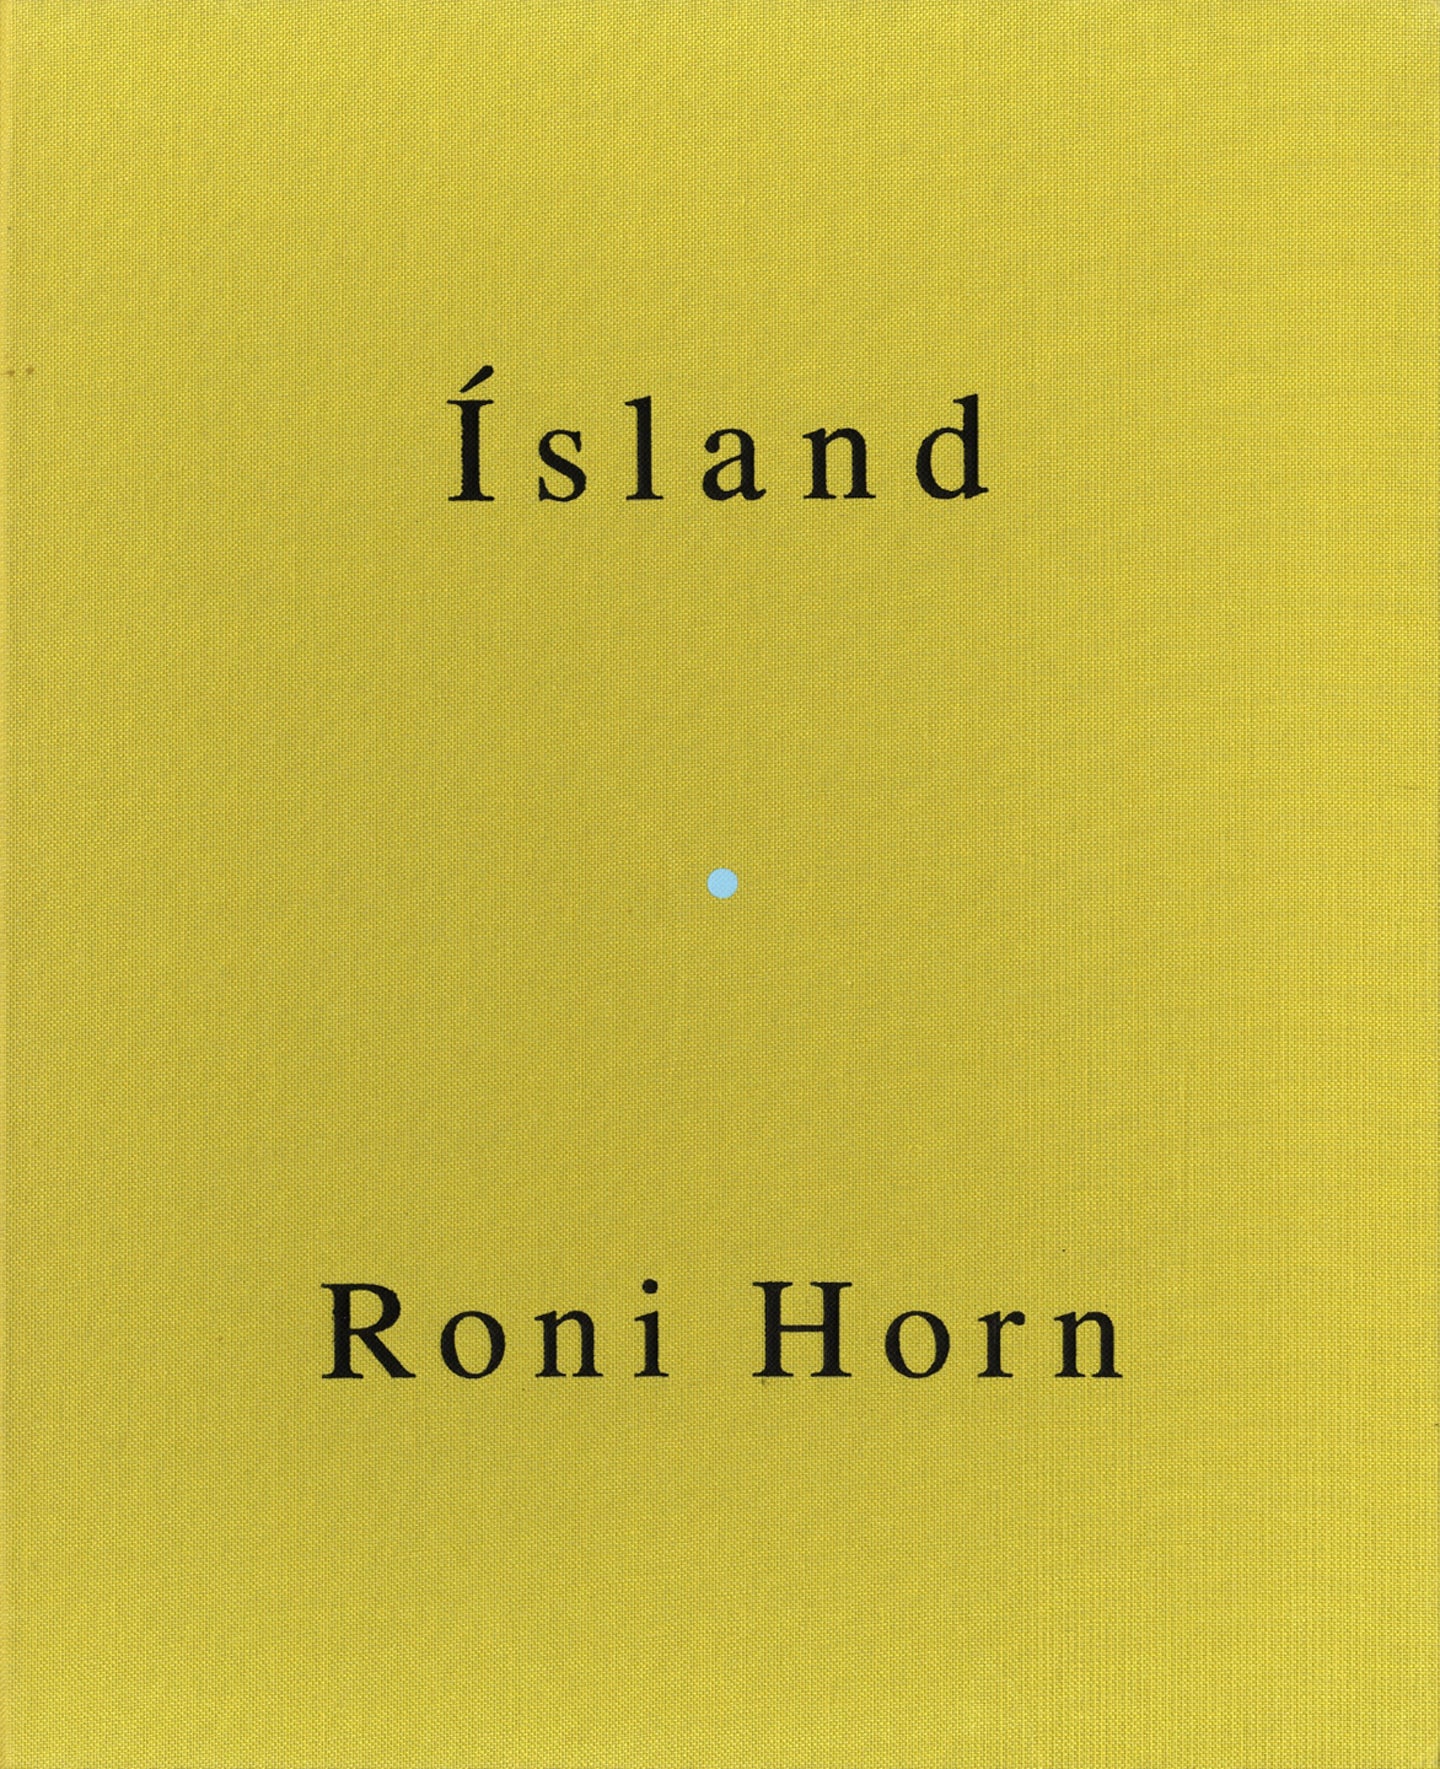 Roni Horn: Ísland (Iceland): To Place 1-10 (Complete Set, with Inner Geography supplement) [all titles SIGNED, all in AS NEW Condition]: 1) Bluff Life; 2) Folds; 3) Lava; 4) Pooling Waters (2 volumes); 5) Verne's Journey; 6) Haraldsdóttir; 7) Arctic Circles; 8) Becoming a Landscape (two volume boxed set); 9) Doubt Box (boxed set); 10) Haraldsdóttir, Part Two; 11) Inner Geography (catalogue supplement)